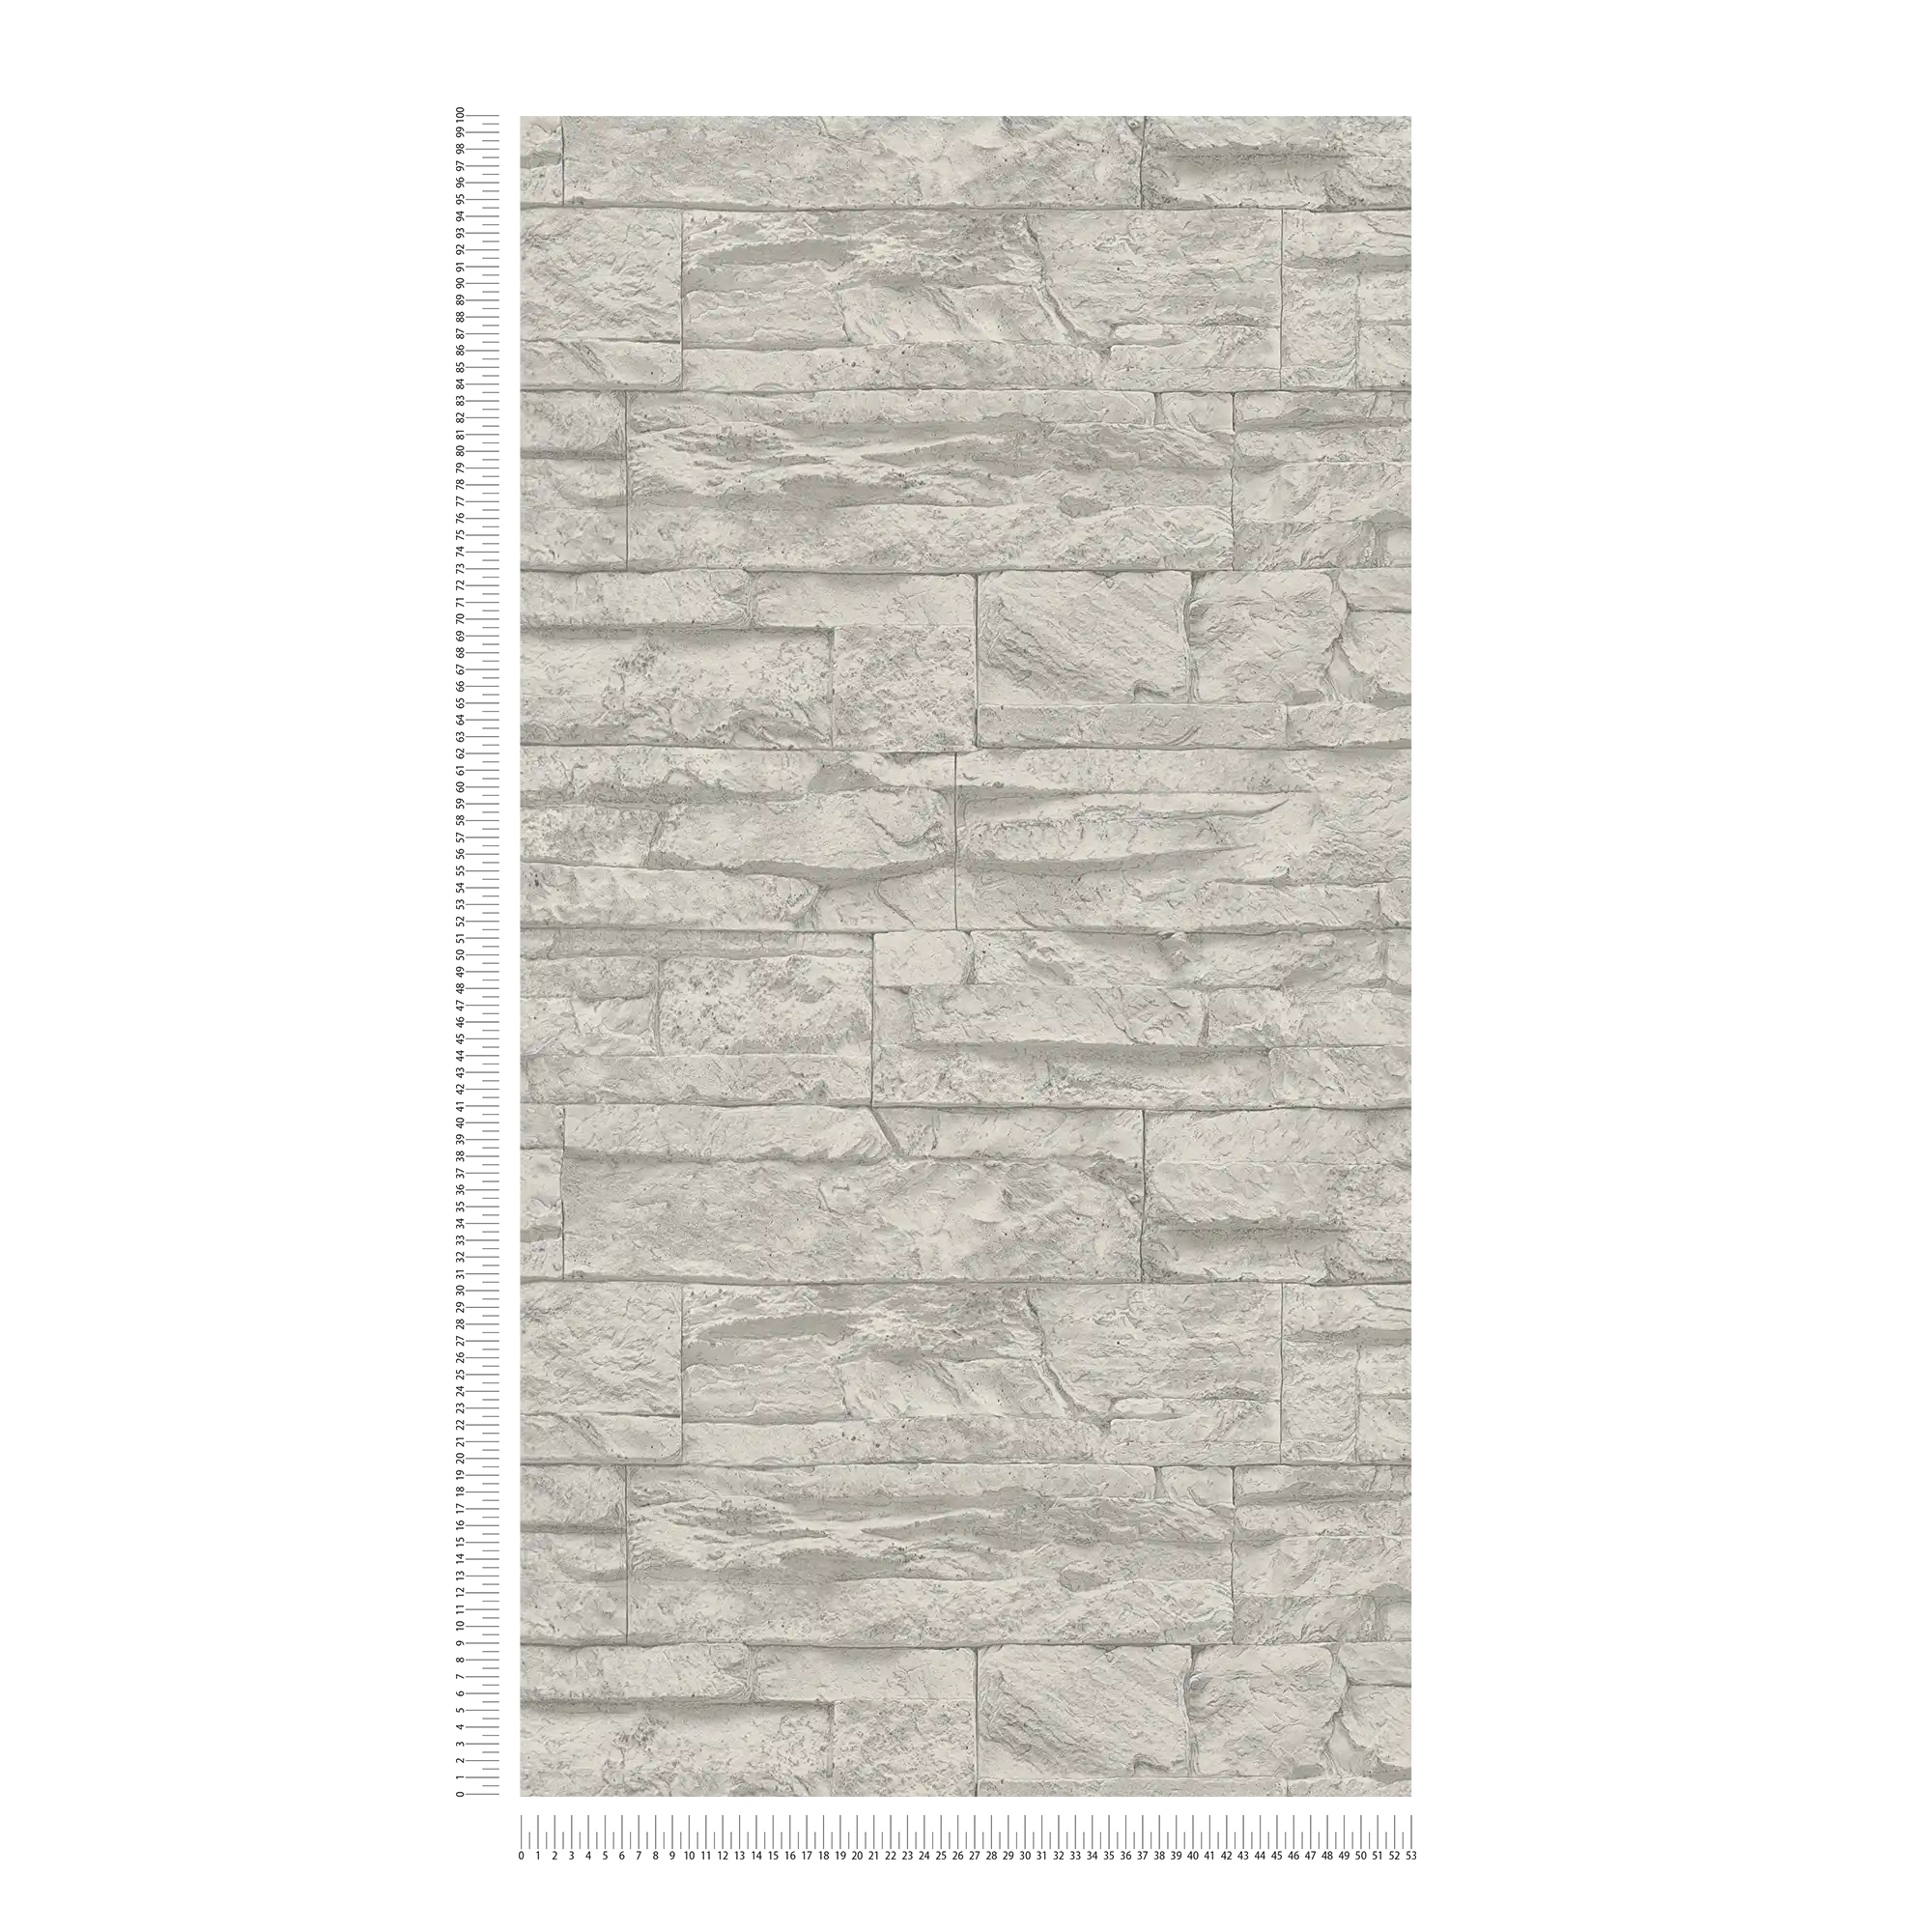             Wallpaper natural stone look detailed & realistic - grey, white
        